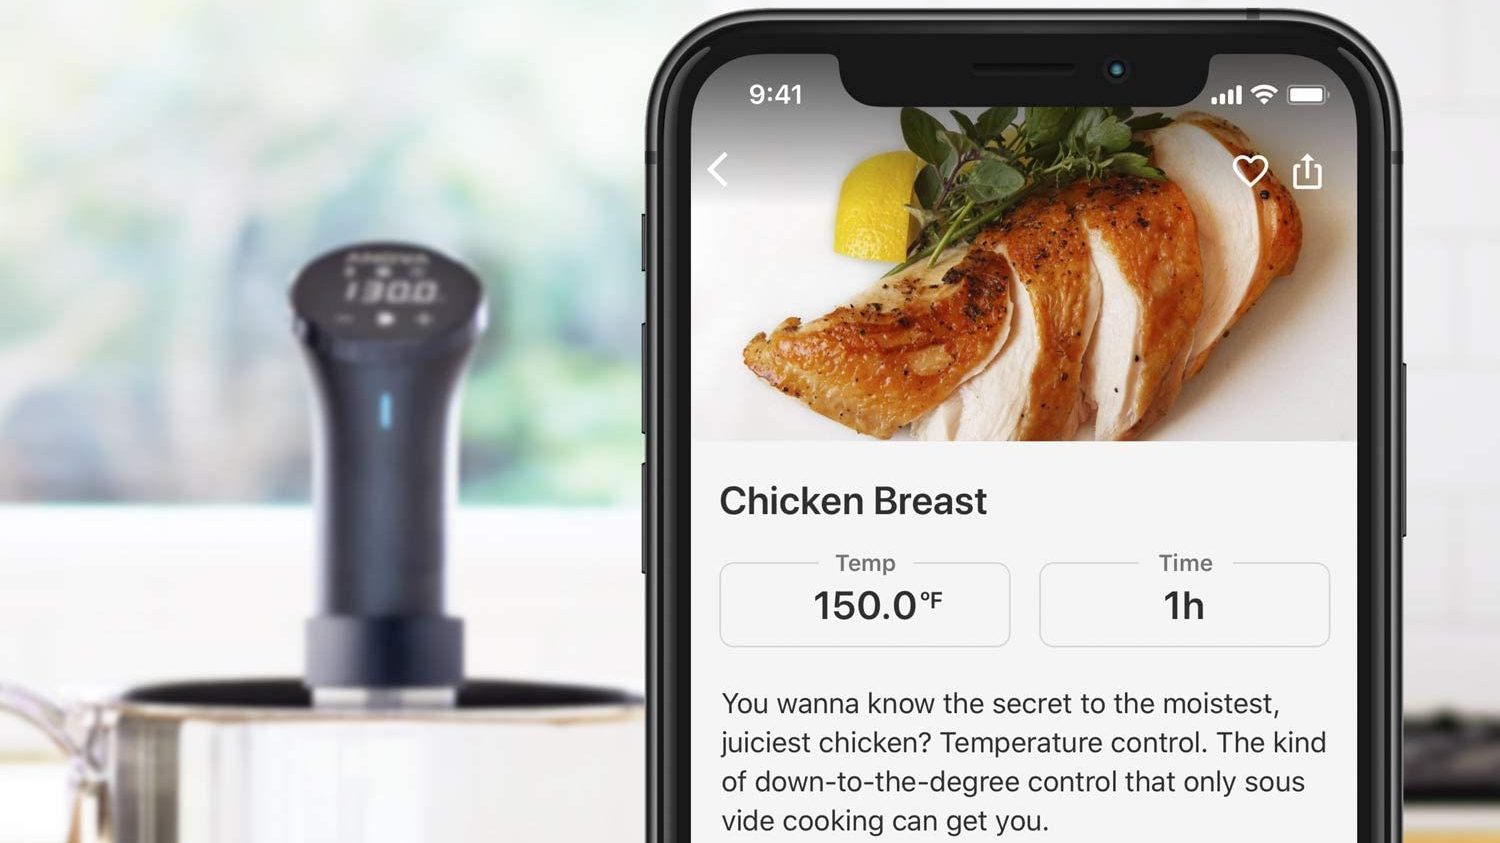 Amazon S Prime Day Deals On Anova Sous Vide Cookers Are Game Changers For Your Kitchen Bgr